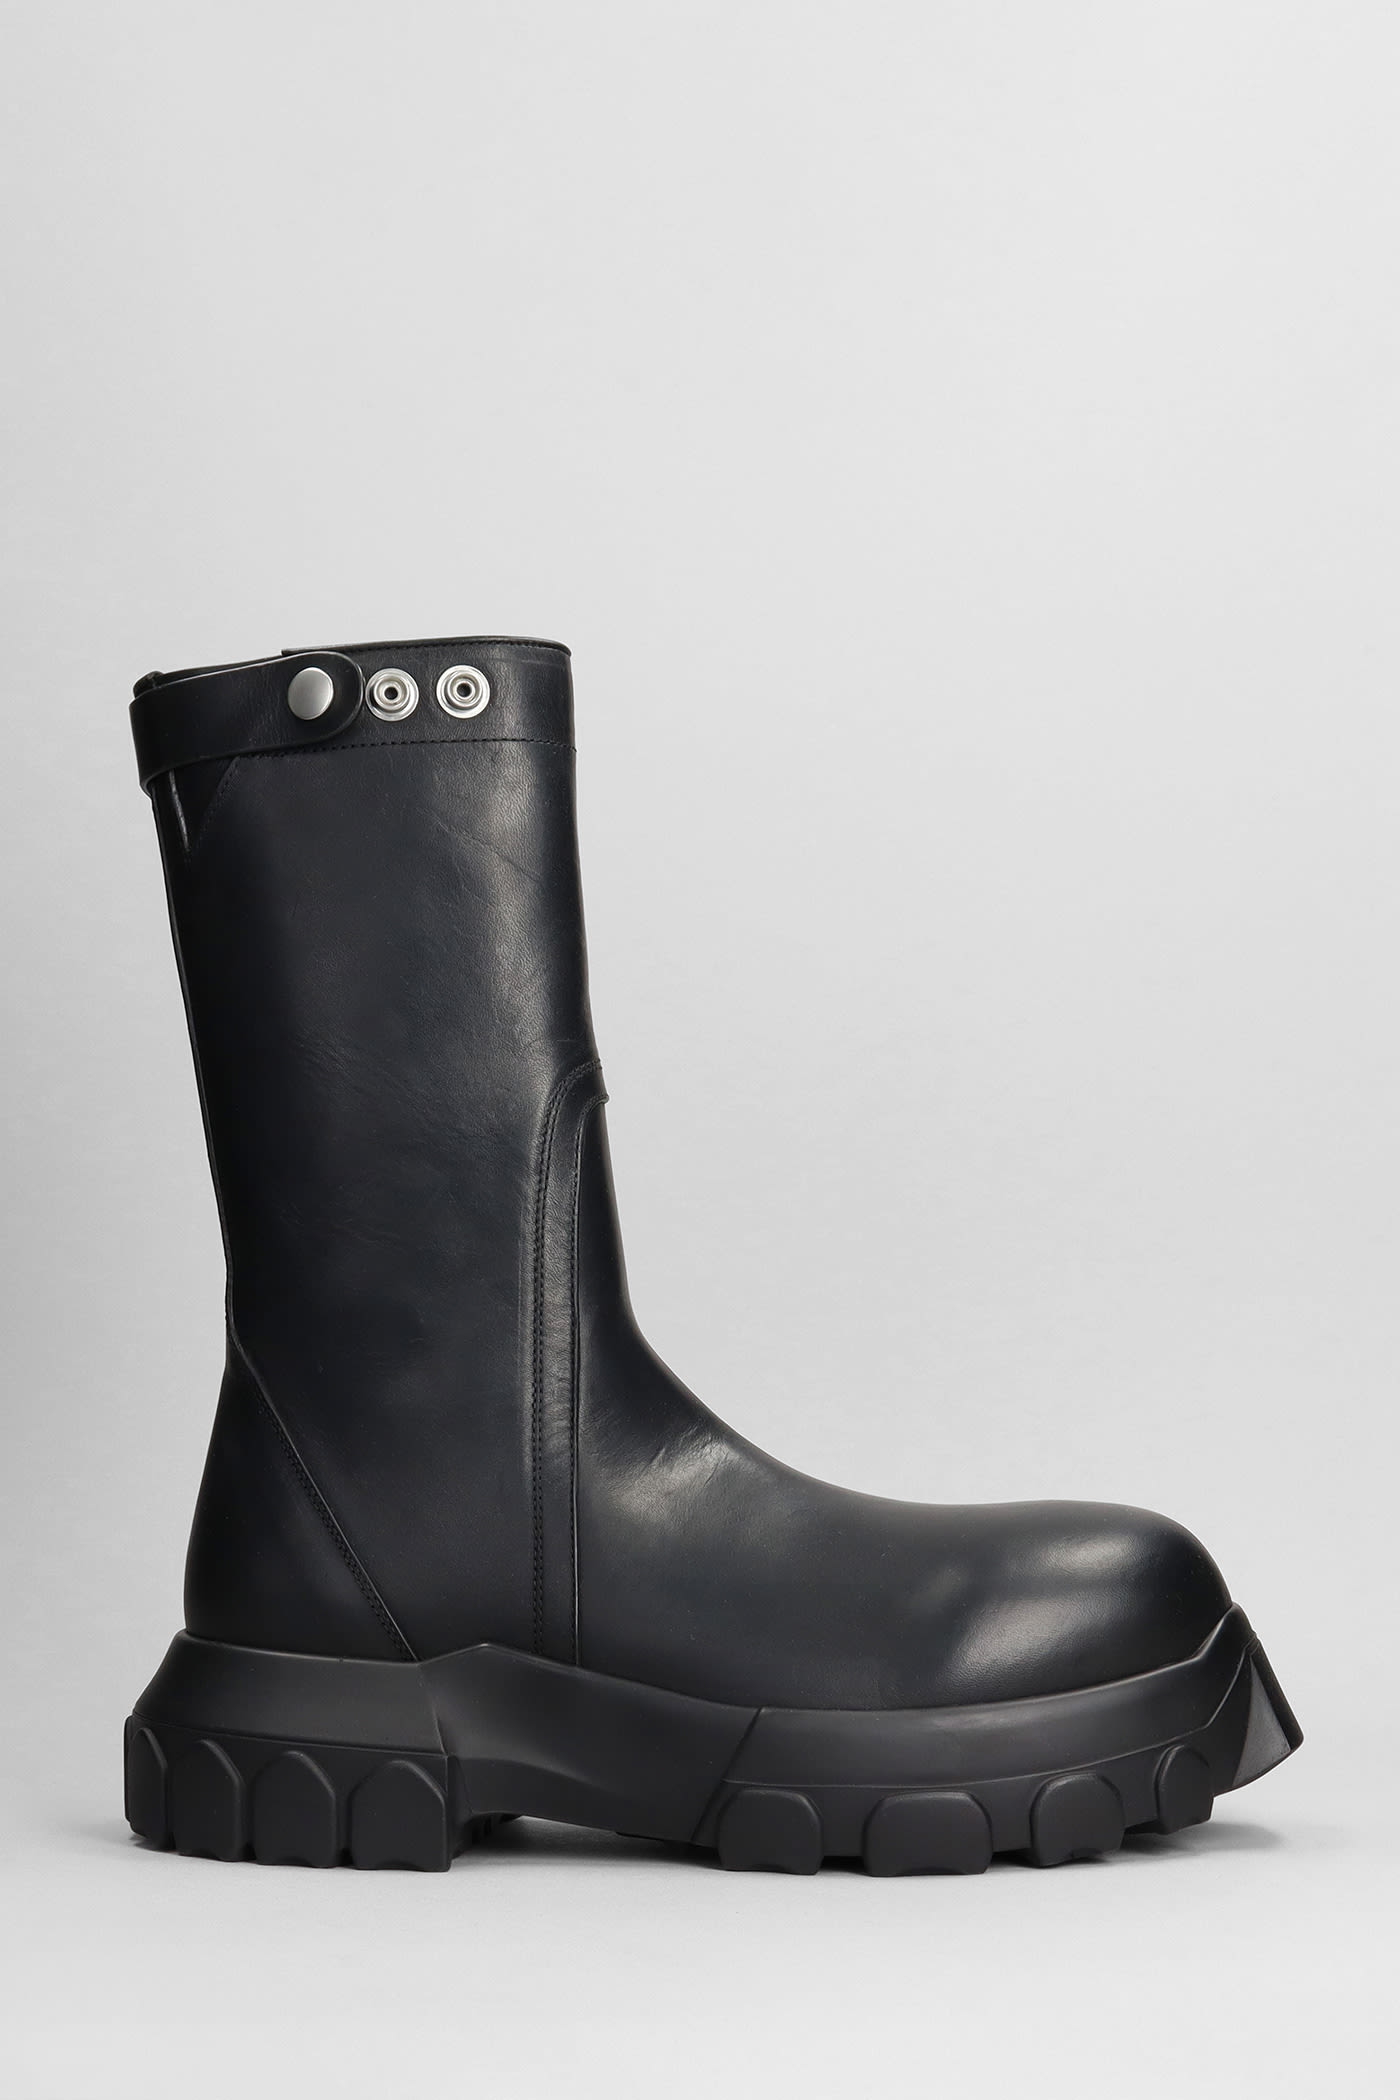 RICK OWENS CREEPER BOZO TRACTOR COMBAT BOOTS IN BLACK LEATHER